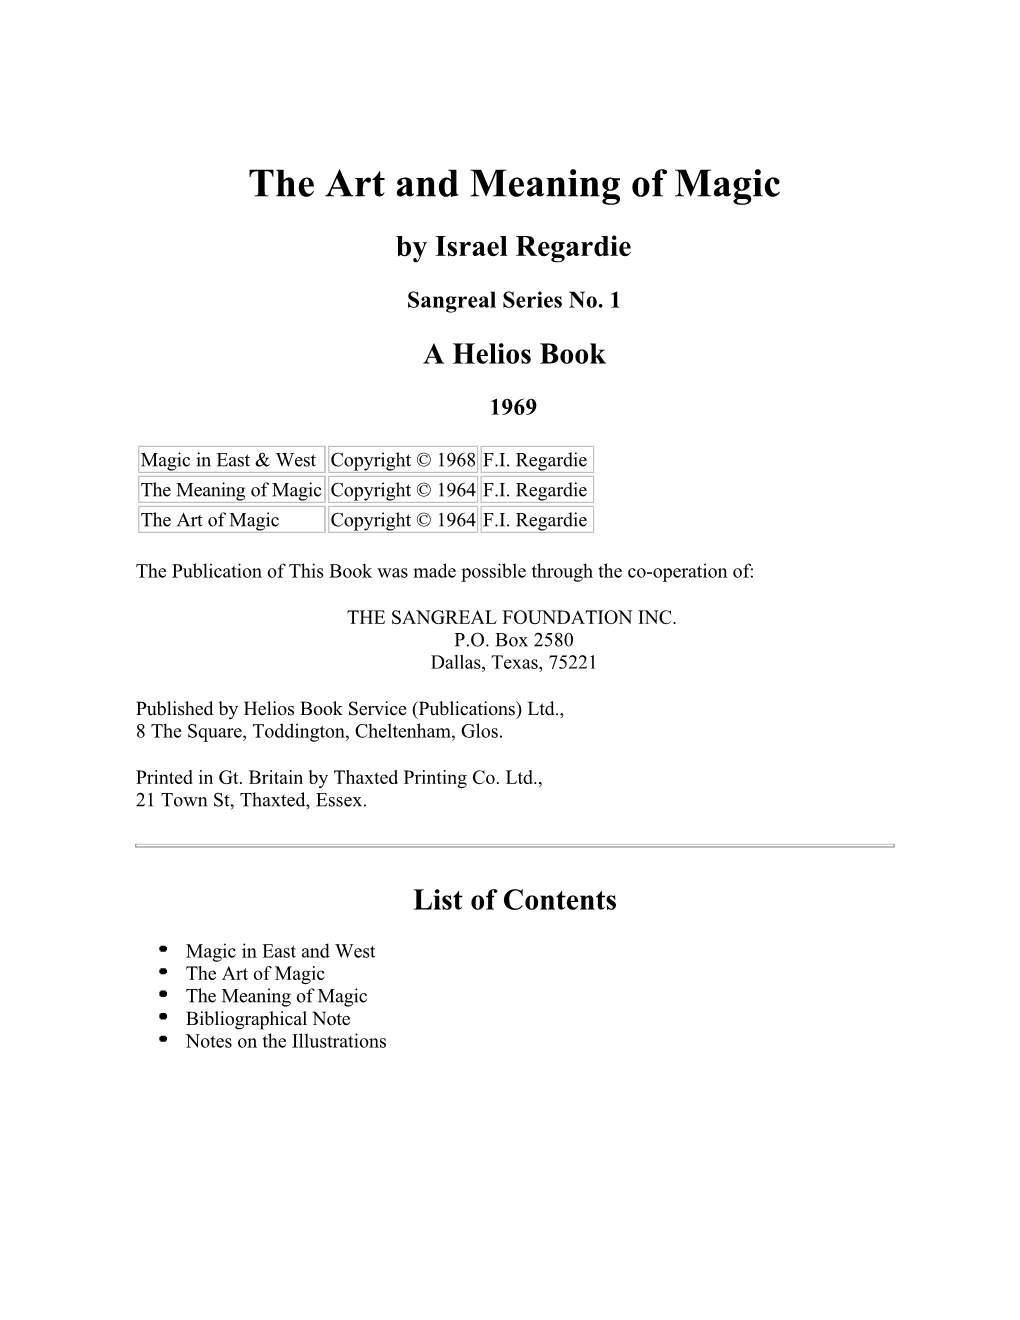 Regardie: the Art and Meaning of Magic; Bibliographical Note BIBLIOGRAPHICAL NOTE